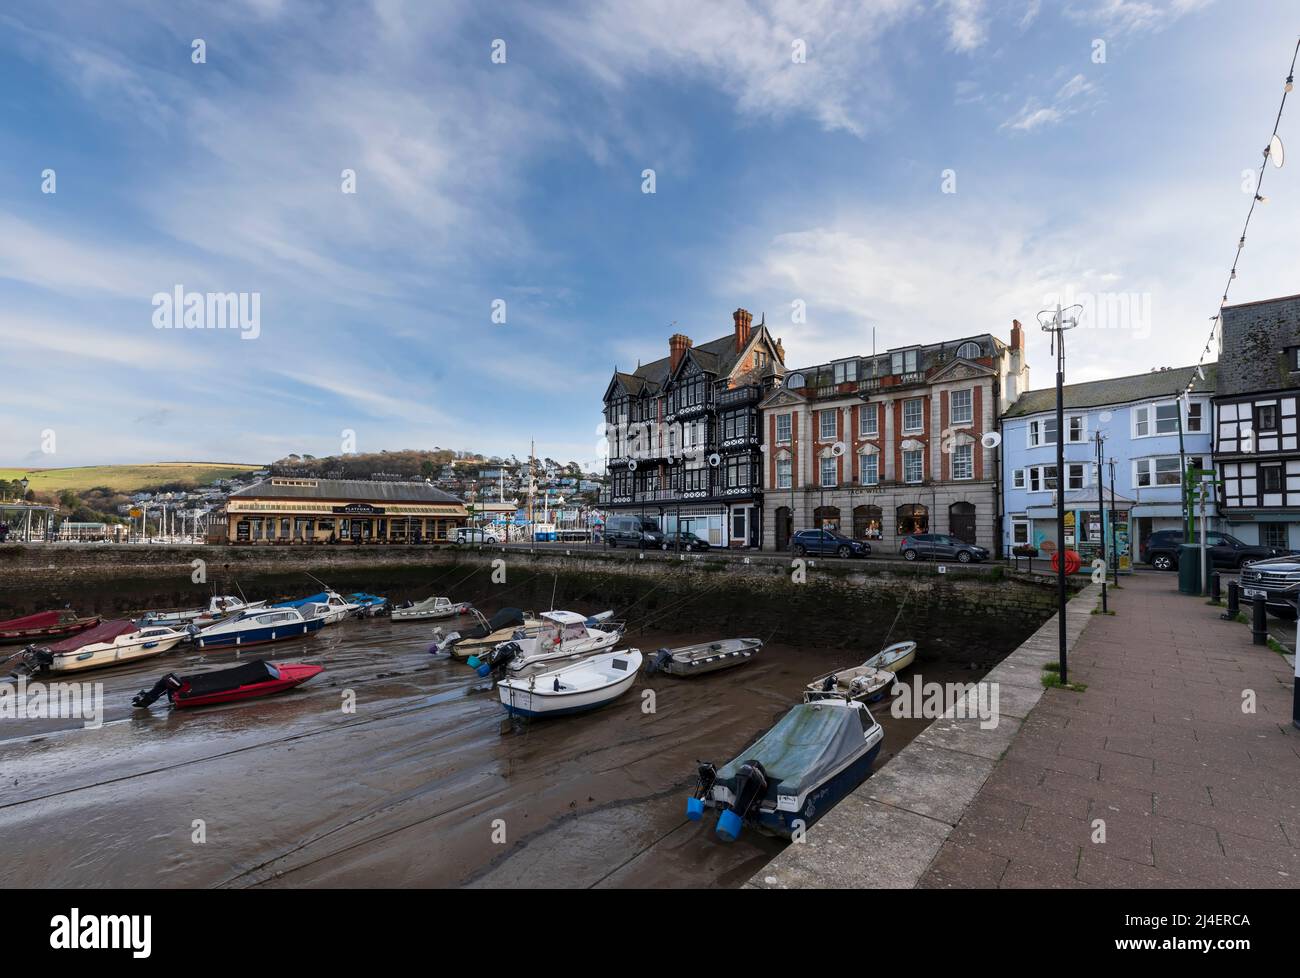 Dartmouth Inner Harbour at low tide, South Hams, Devon. boats sit in the mud of the basin until the water returns with the incoming tide. Historic bui Stock Photo